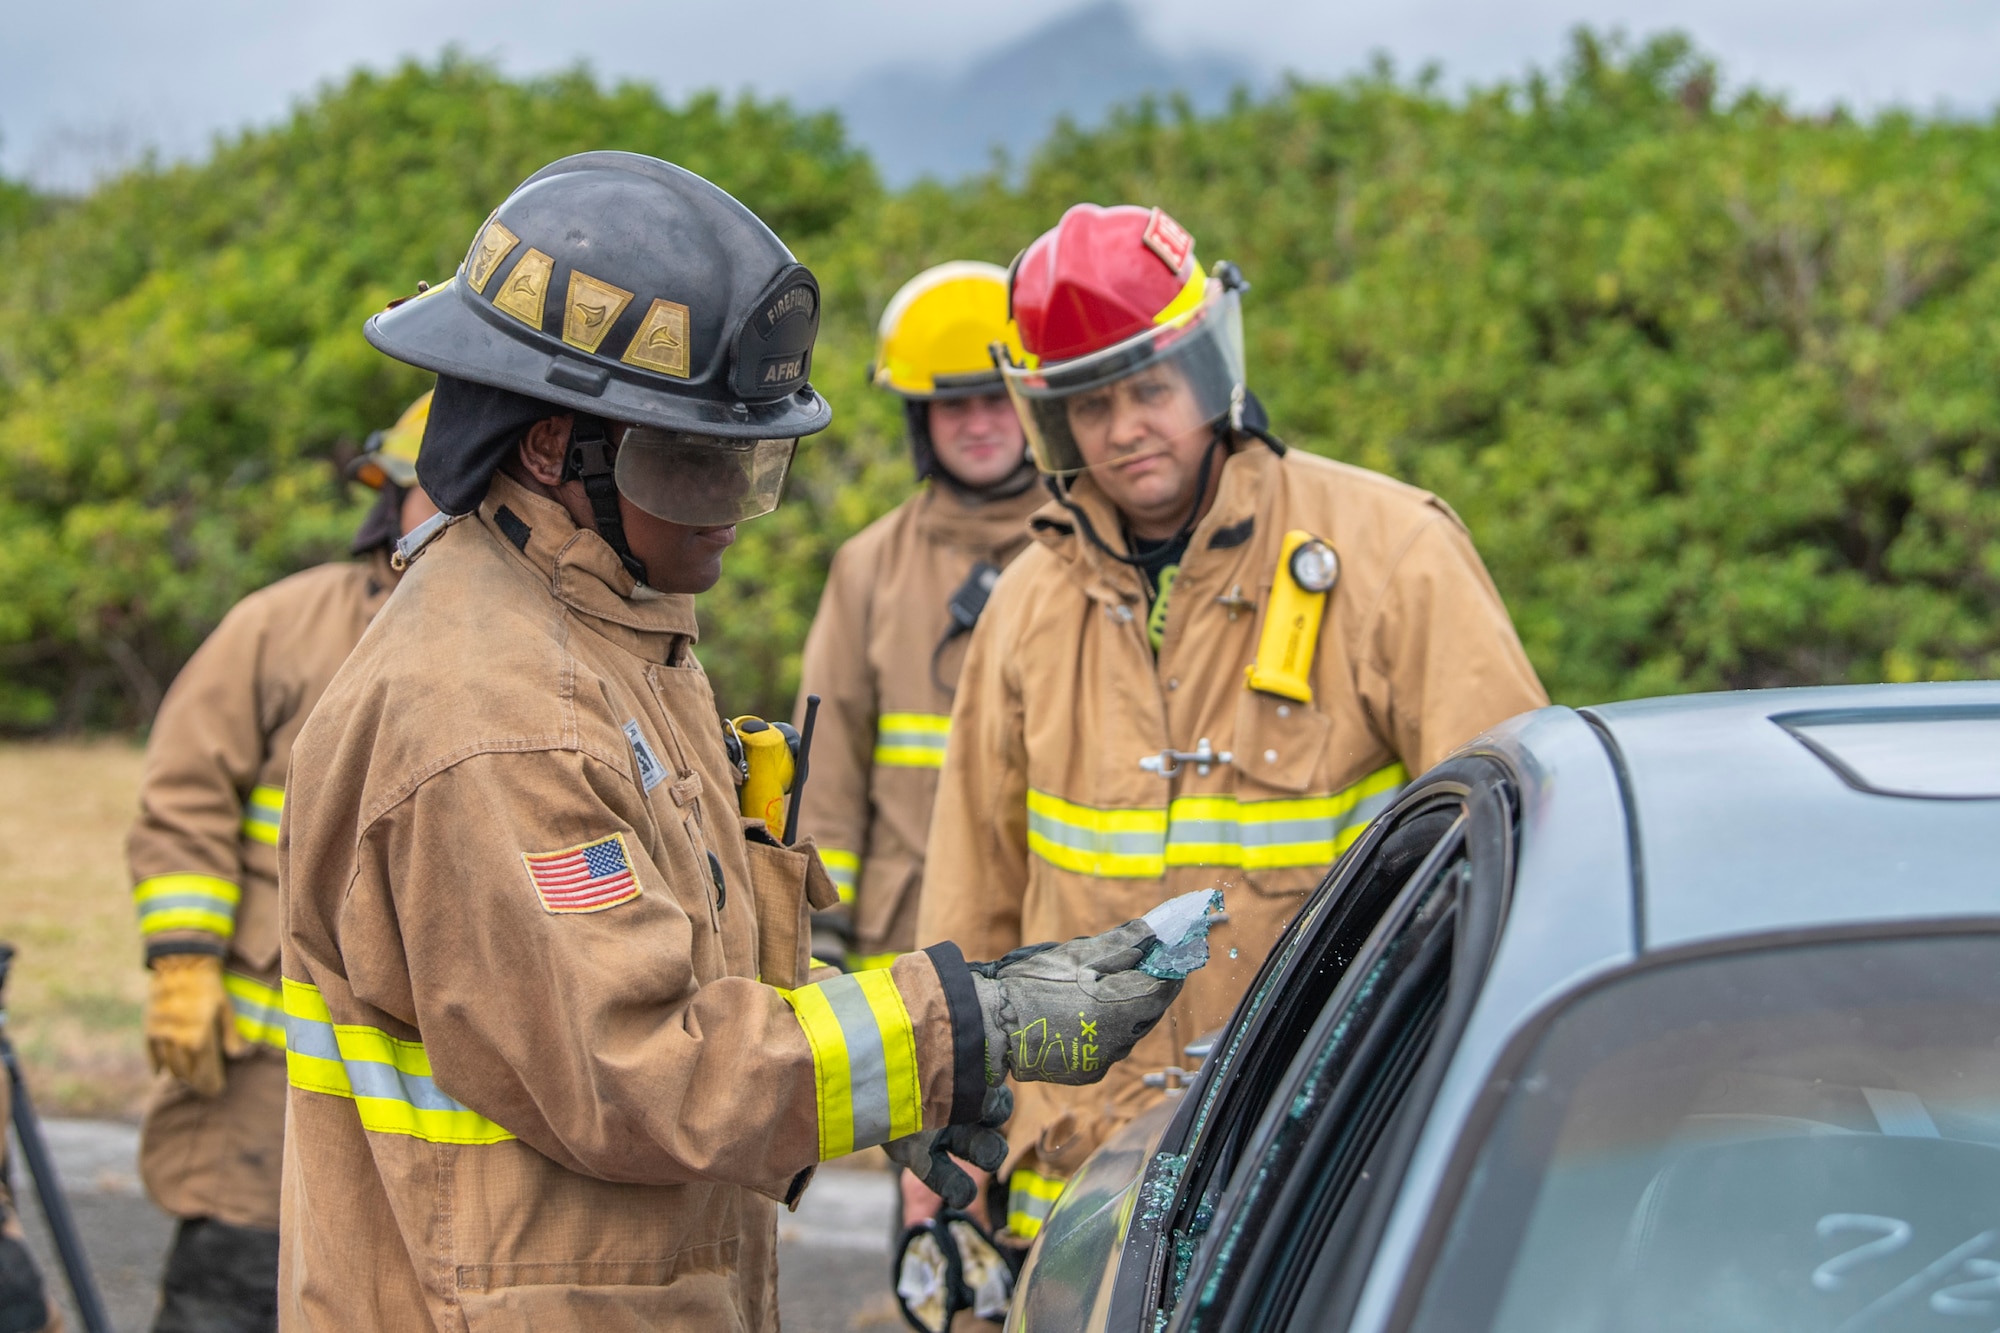 Senior Airman Josiah Williams, 624th Civil Engineering Squadron, participates in vehicle extrication training with U.S. Marines Aircraft Rescue and Federal Firefighters at MCAS Kaneohe Bay, Marine Corps Base Hawaii May 18, 2022.